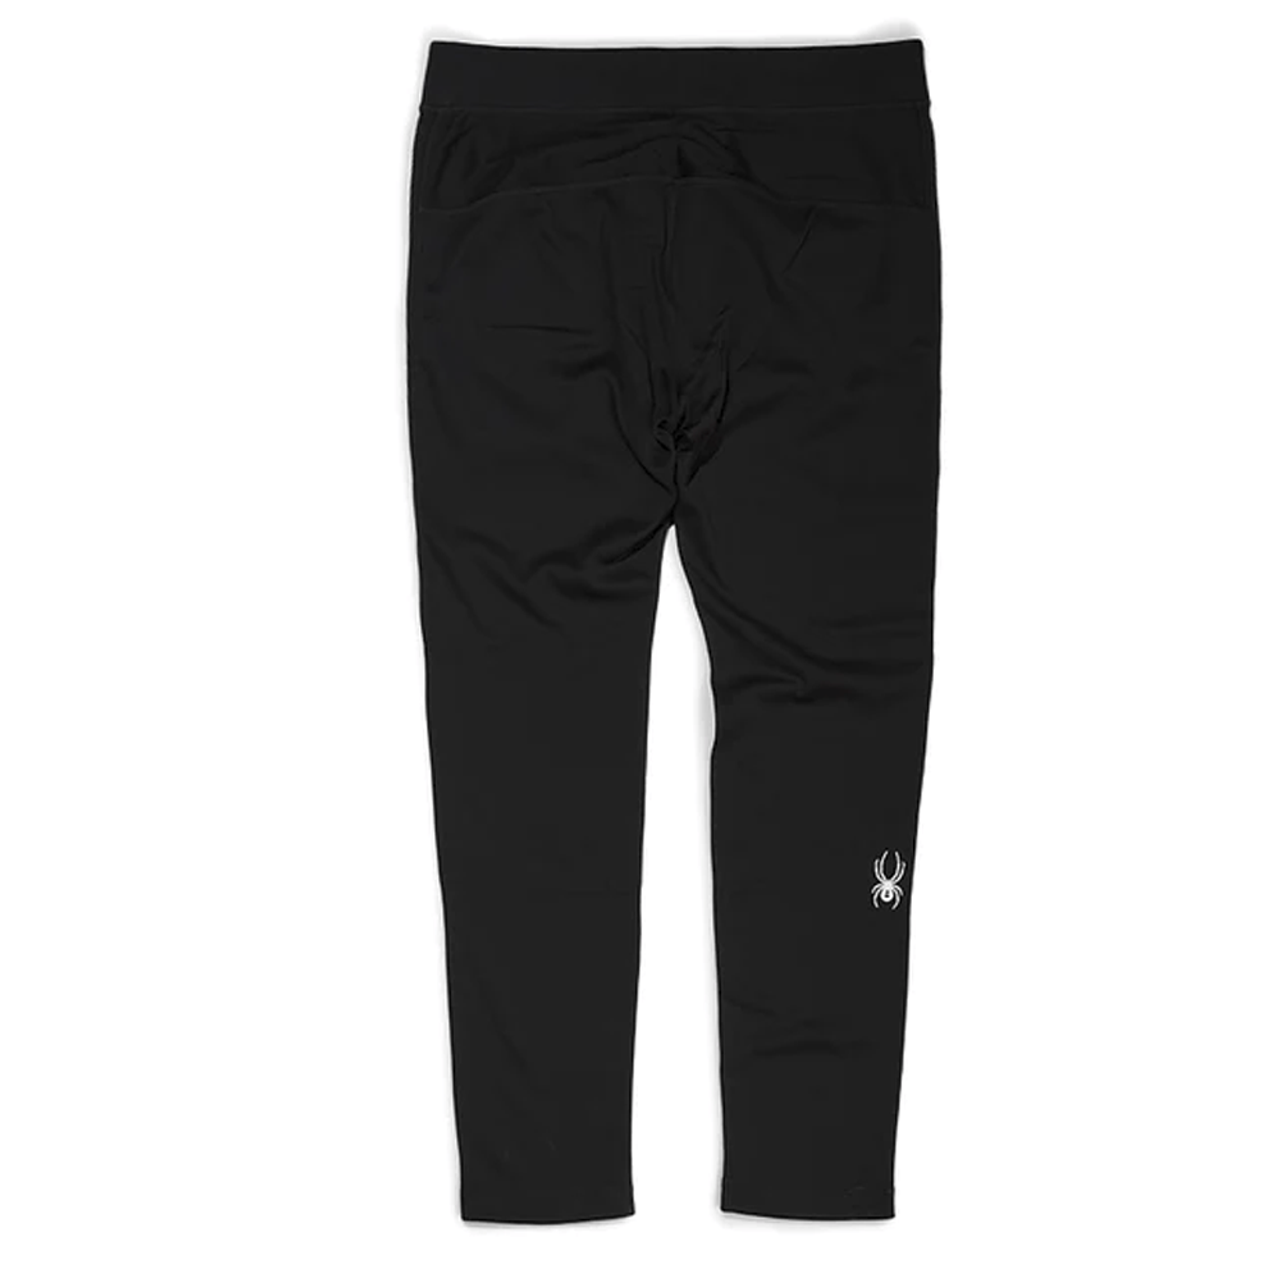 Spyder Charger Pants